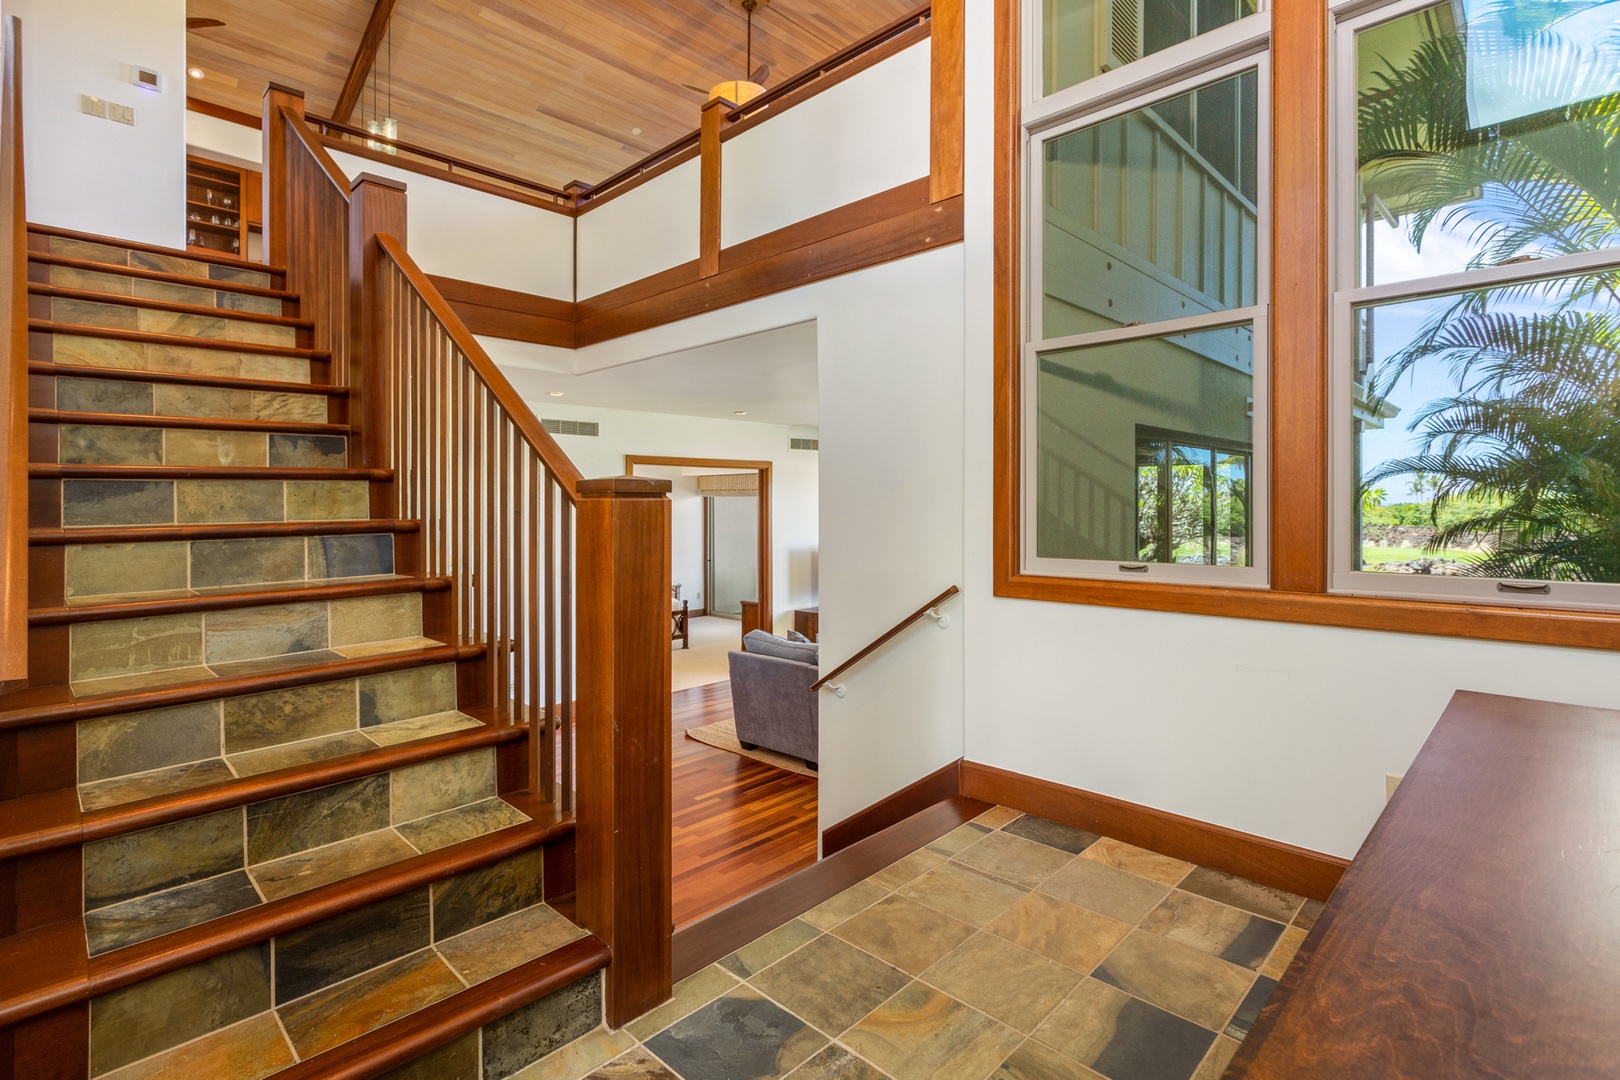 Kailua Kona Vacation Rentals, 3BD Ka'Ulu Villa (129D) at Four Seasons Resort at Hualalai - Stately entryway reveals stairways to the upper and lower levels.